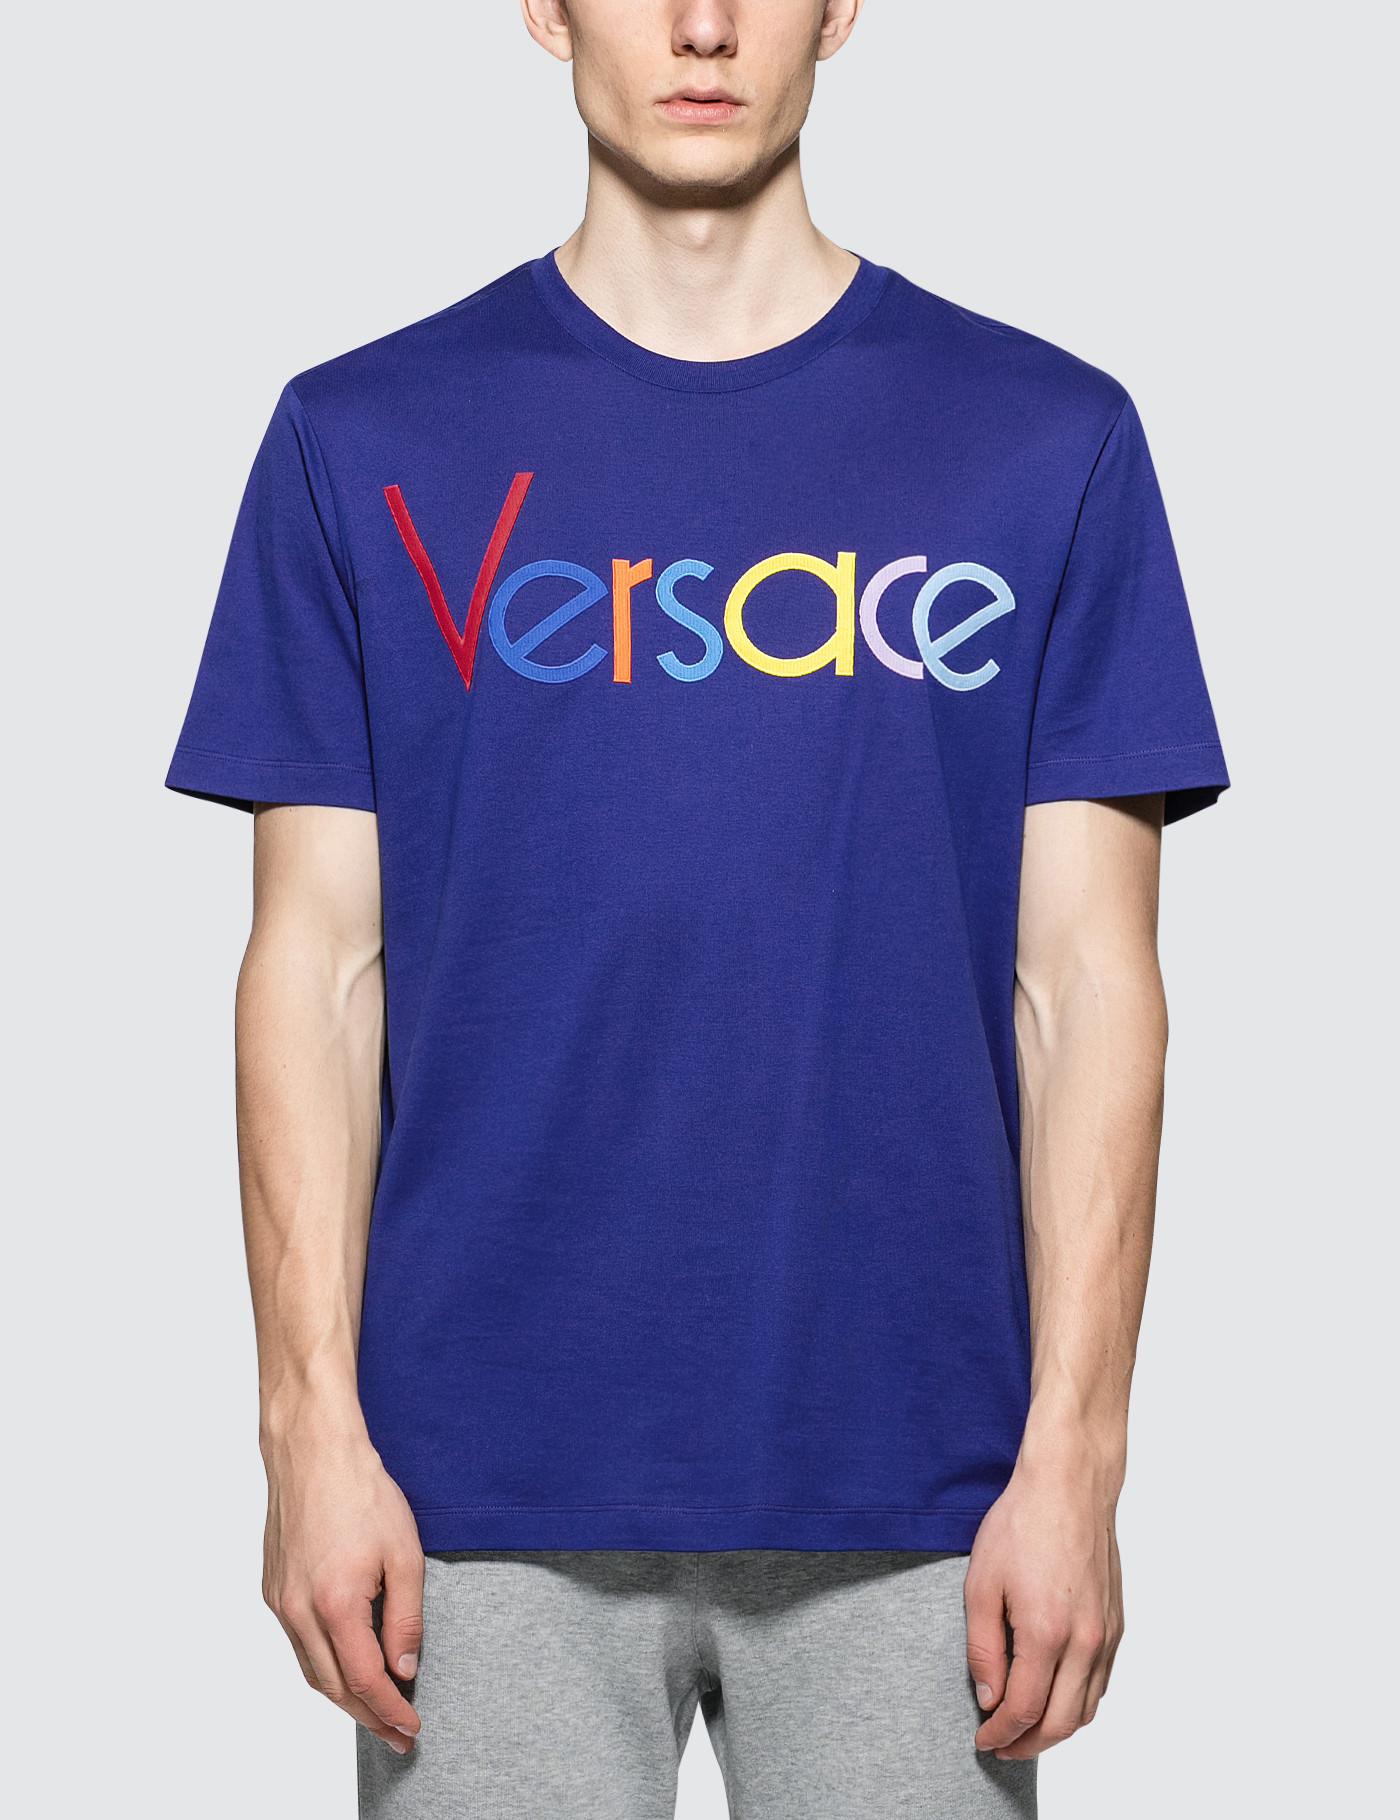 versace embroidered t shirt